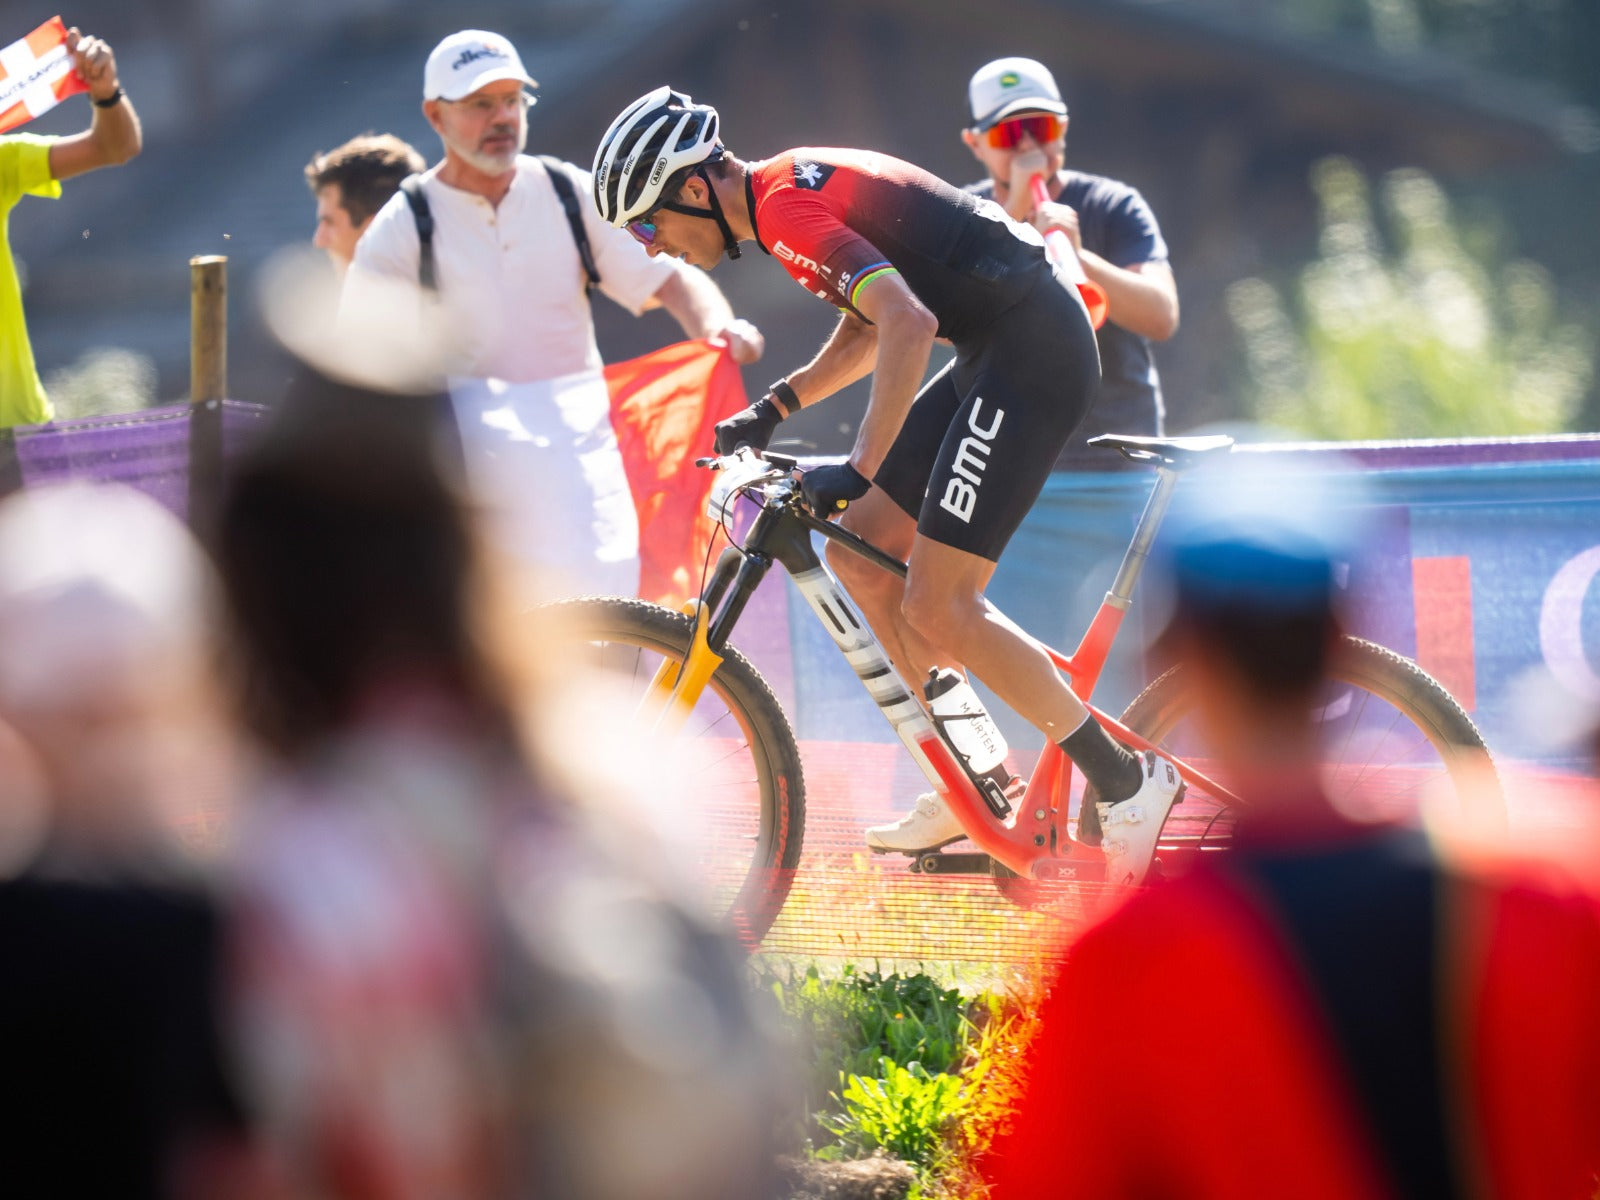 Team BMC travels overseas for last two races in the World Cup Series